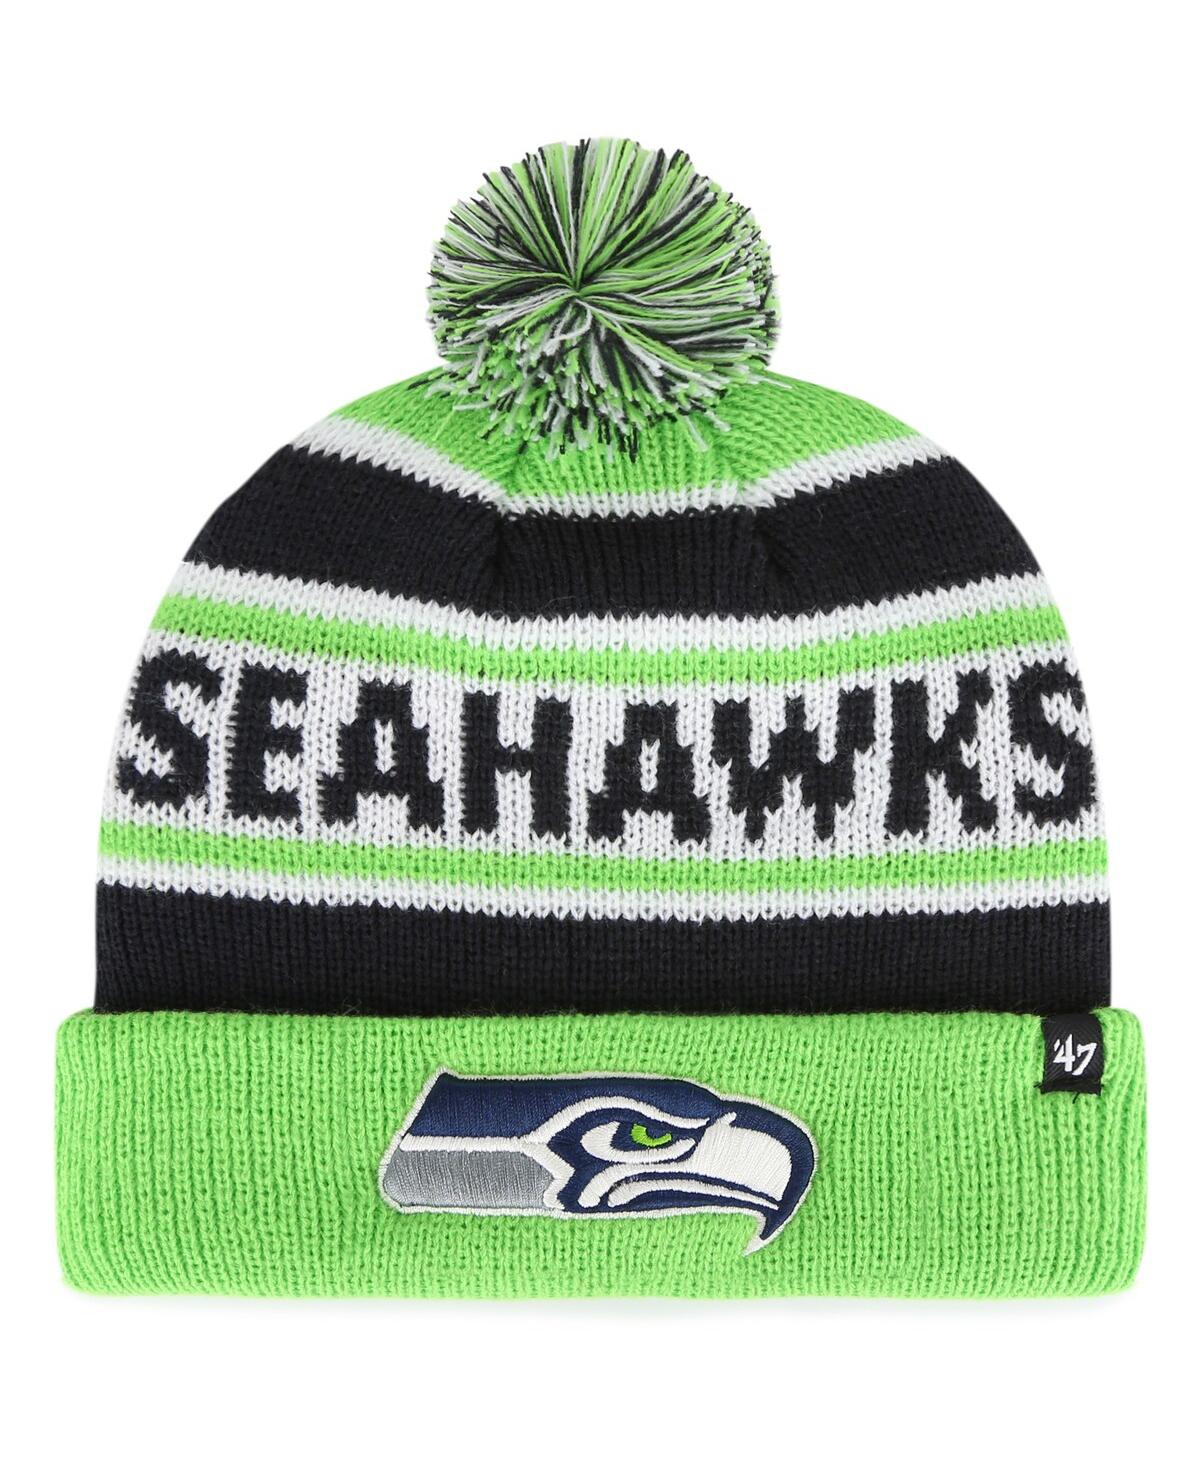 47 Brand Kids' Big Boys College Navy And Neon Green Seattle Seahawks Hangtime Cuffed Knit Hat With Pom In Navy,neon